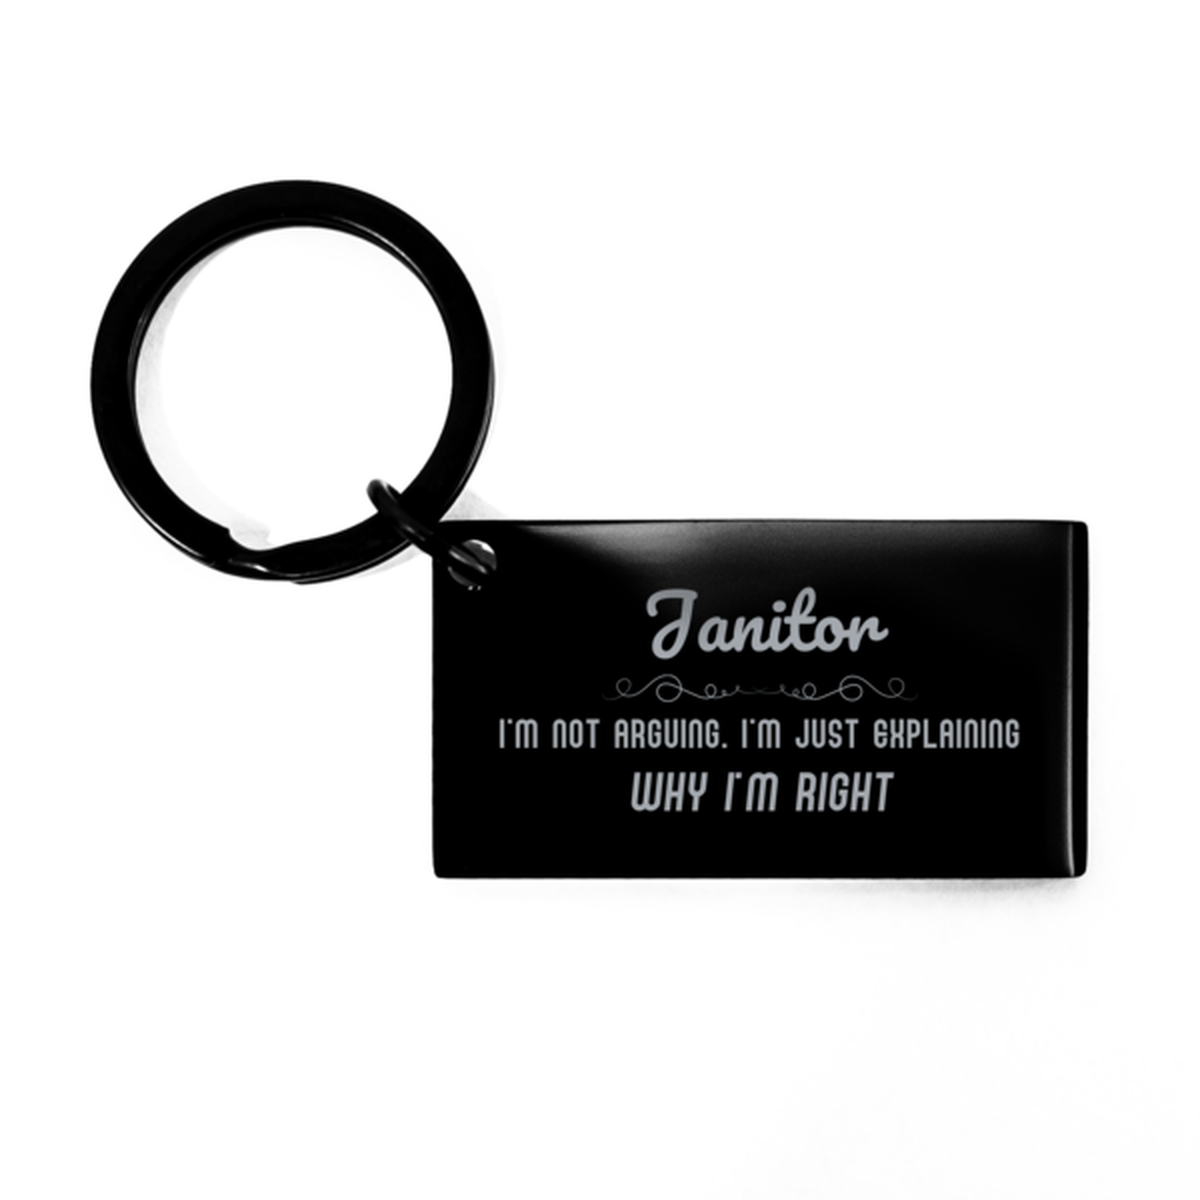 Janitor I'm not Arguing. I'm Just Explaining Why I'm RIGHT Keychain, Funny Saying Quote Janitor Gifts For Janitor Graduation Birthday Christmas Gifts for Men Women Coworker